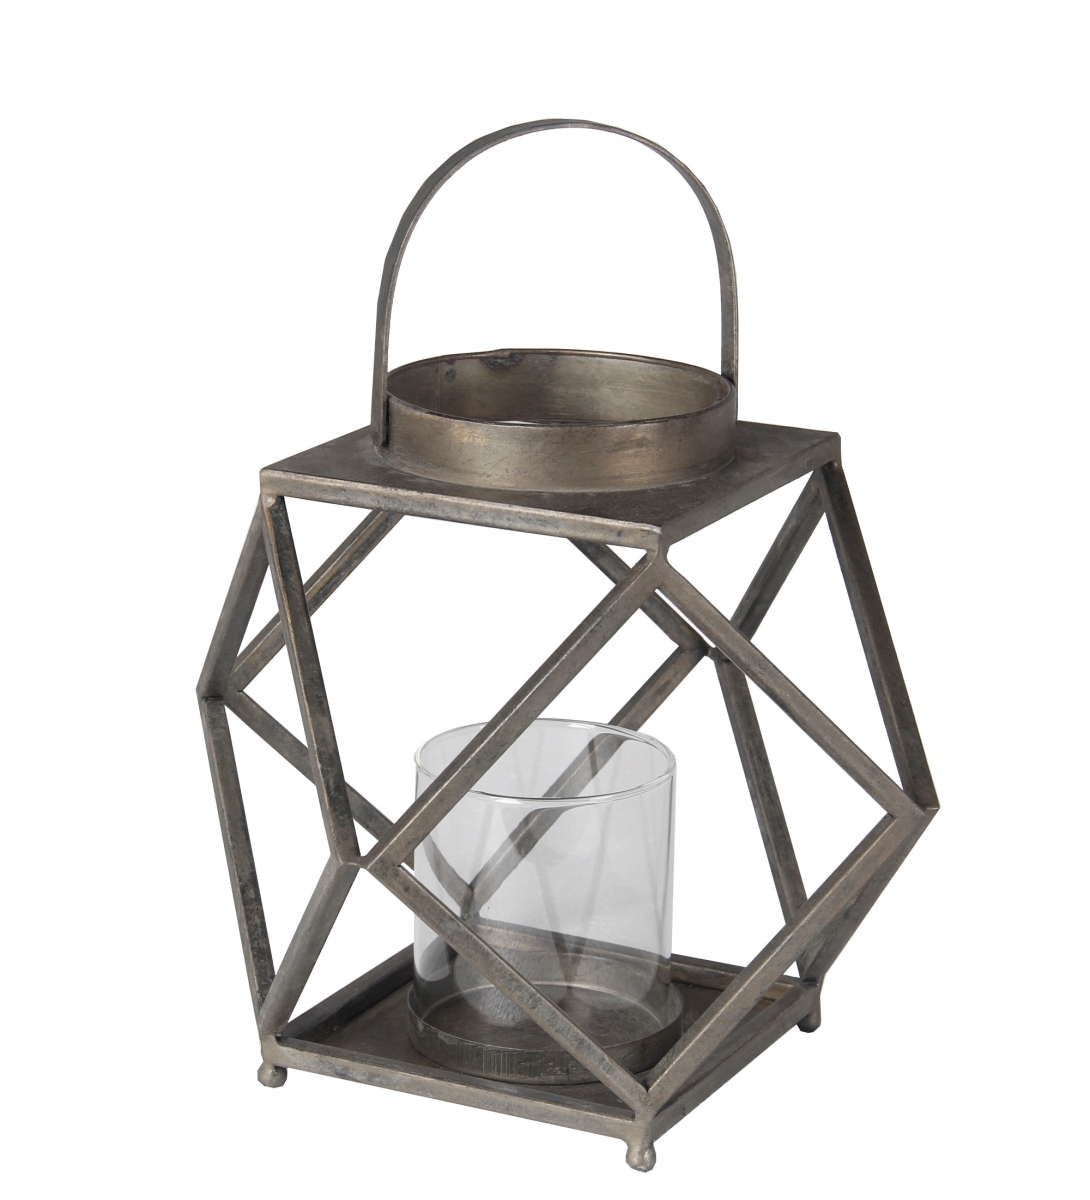 UPC 805572888786 product image for Privilege 88878 11 x 11 x 9.5 in. Iron Candle Lantern Small | upcitemdb.com